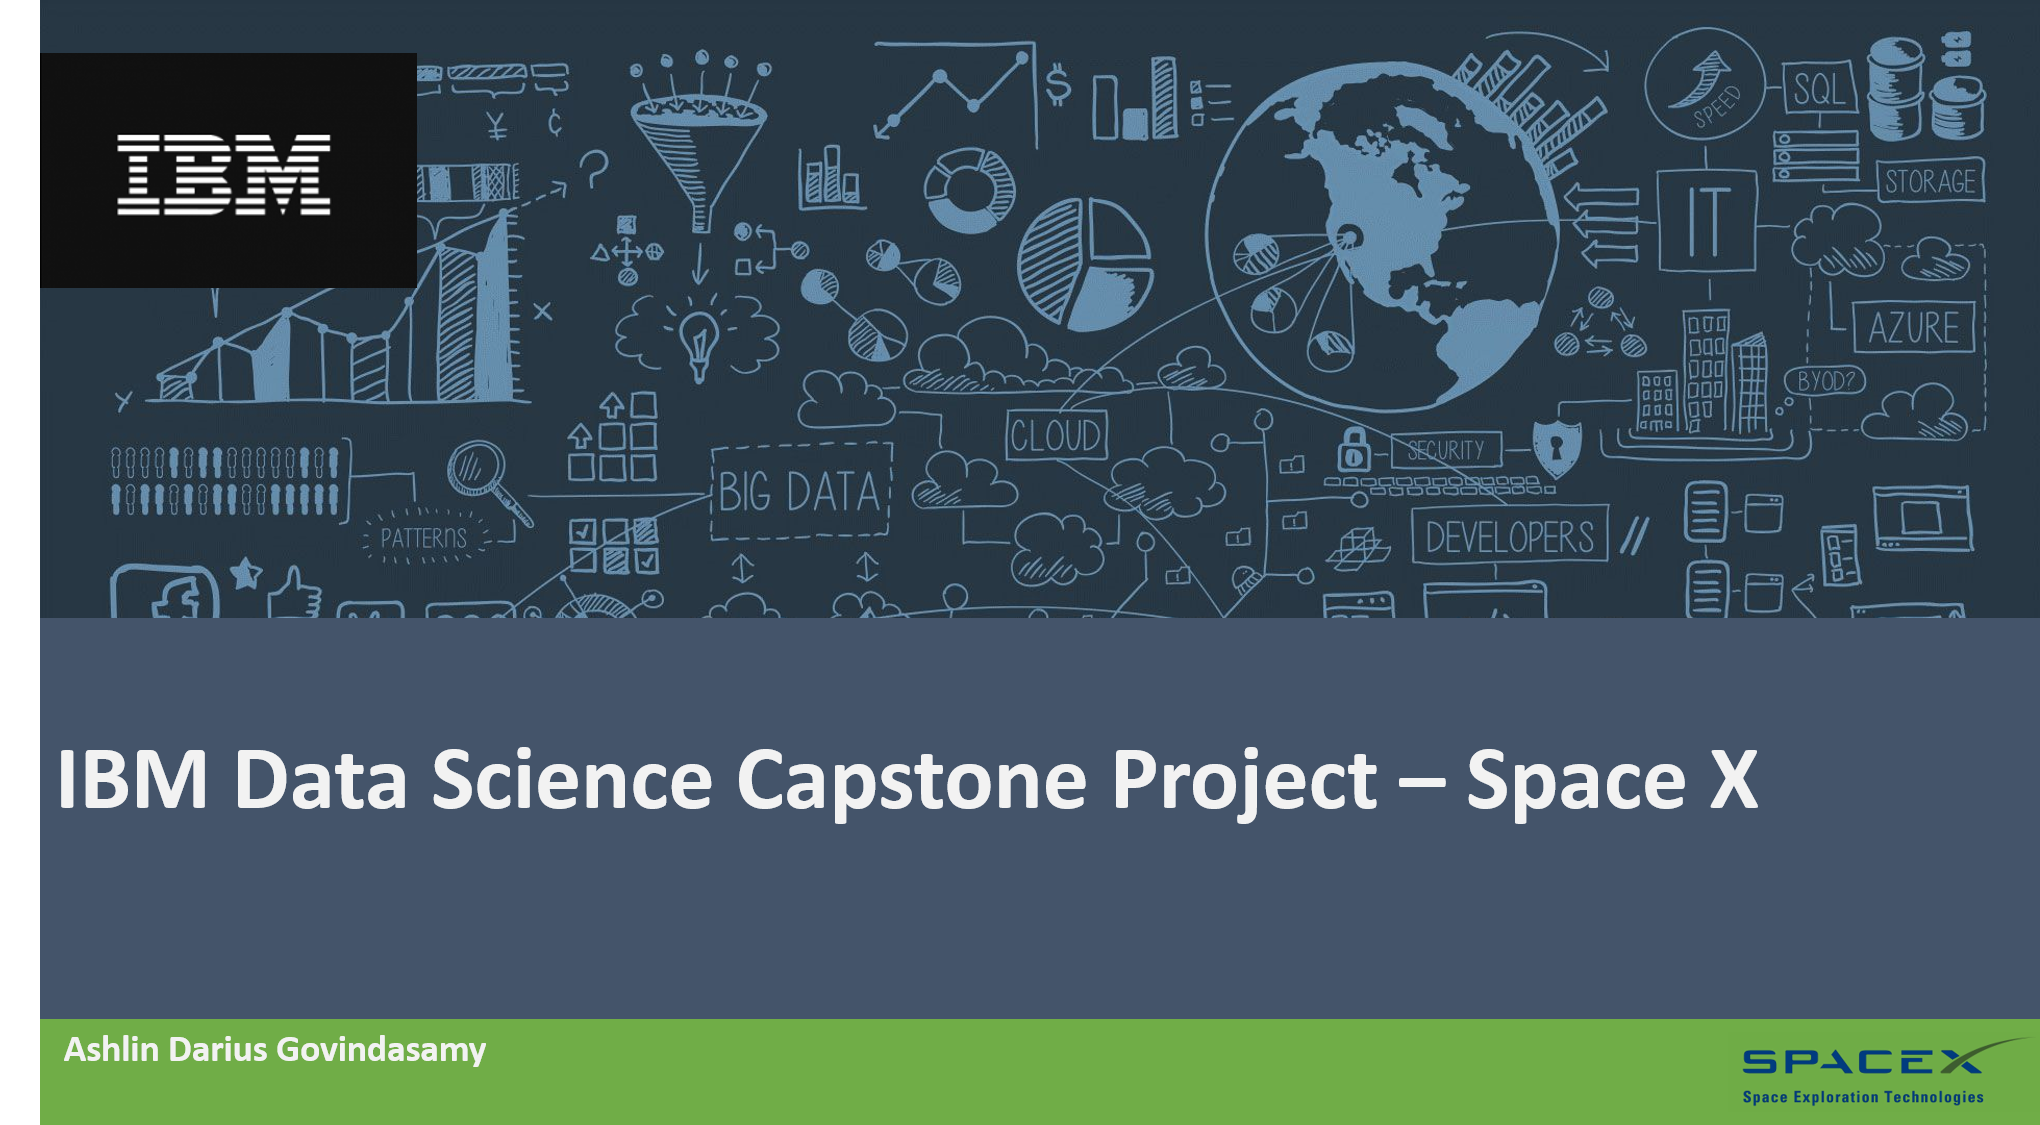 ibm data science capstone project spacex